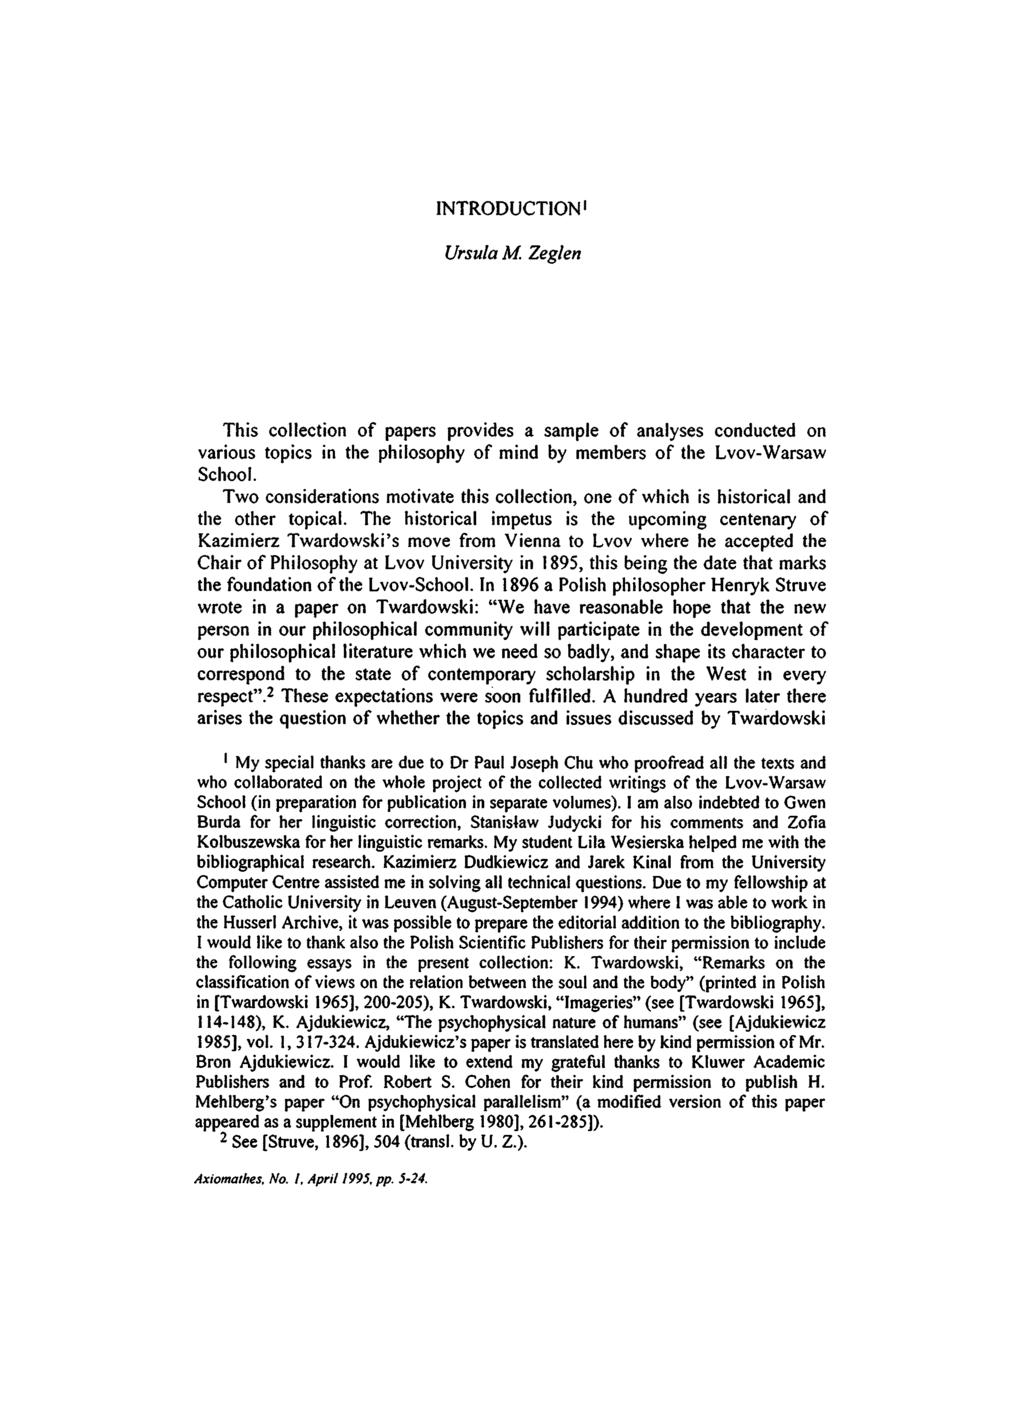 INTRODUCTION I Ursula M. Zeglen This collection of papers provides a sample of analyses conducted on various topics in the philosophy of mind by members of the Lvov-Warsaw School.